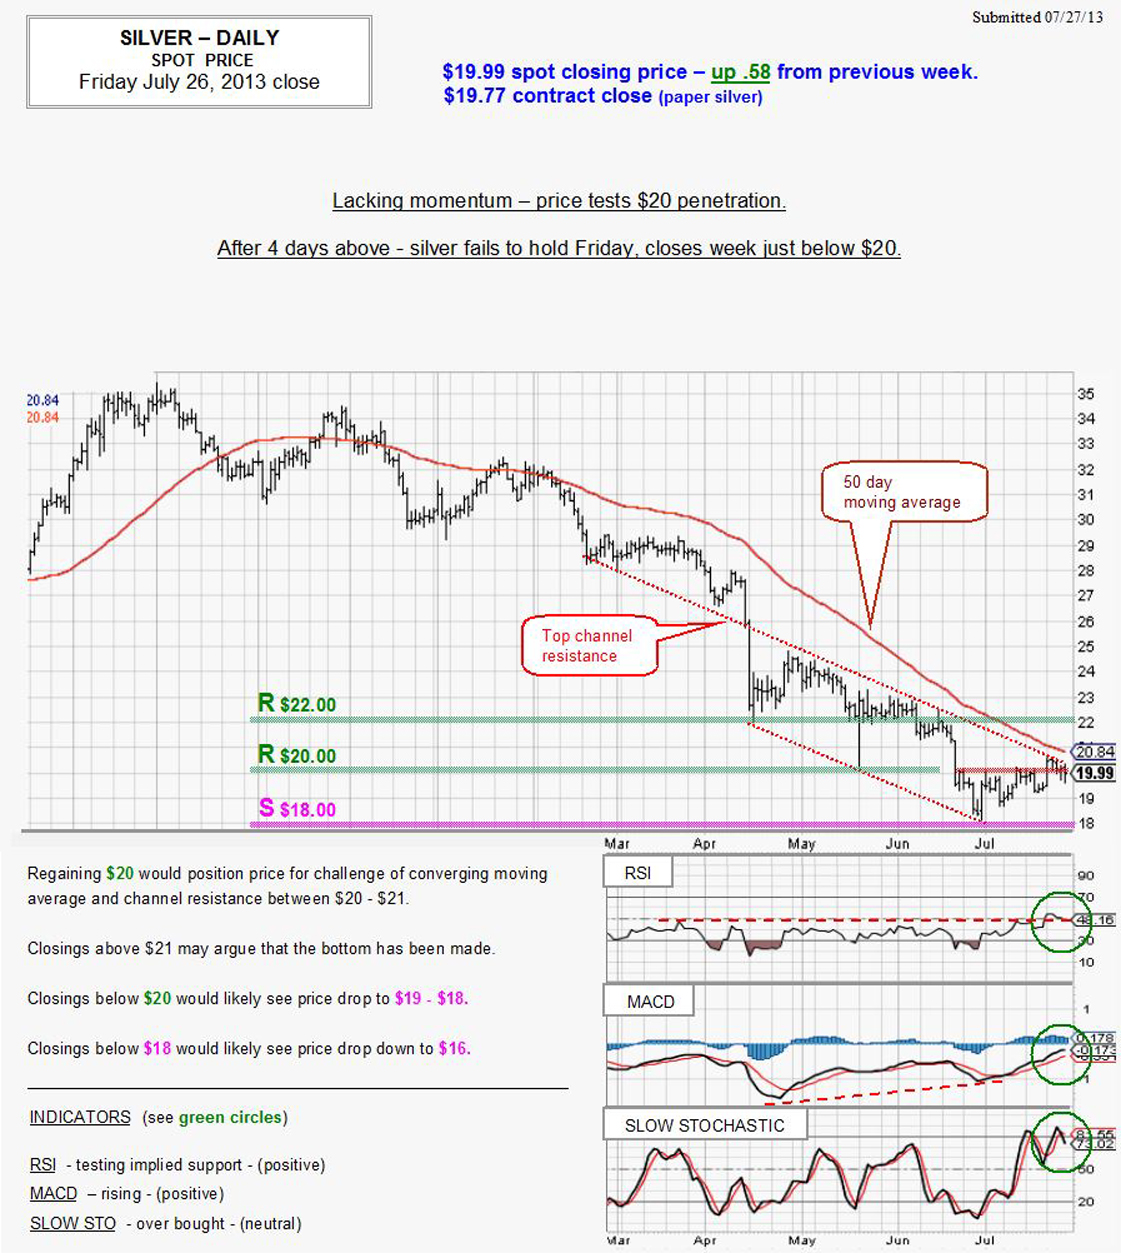 July 26, 2013 chart & commentary